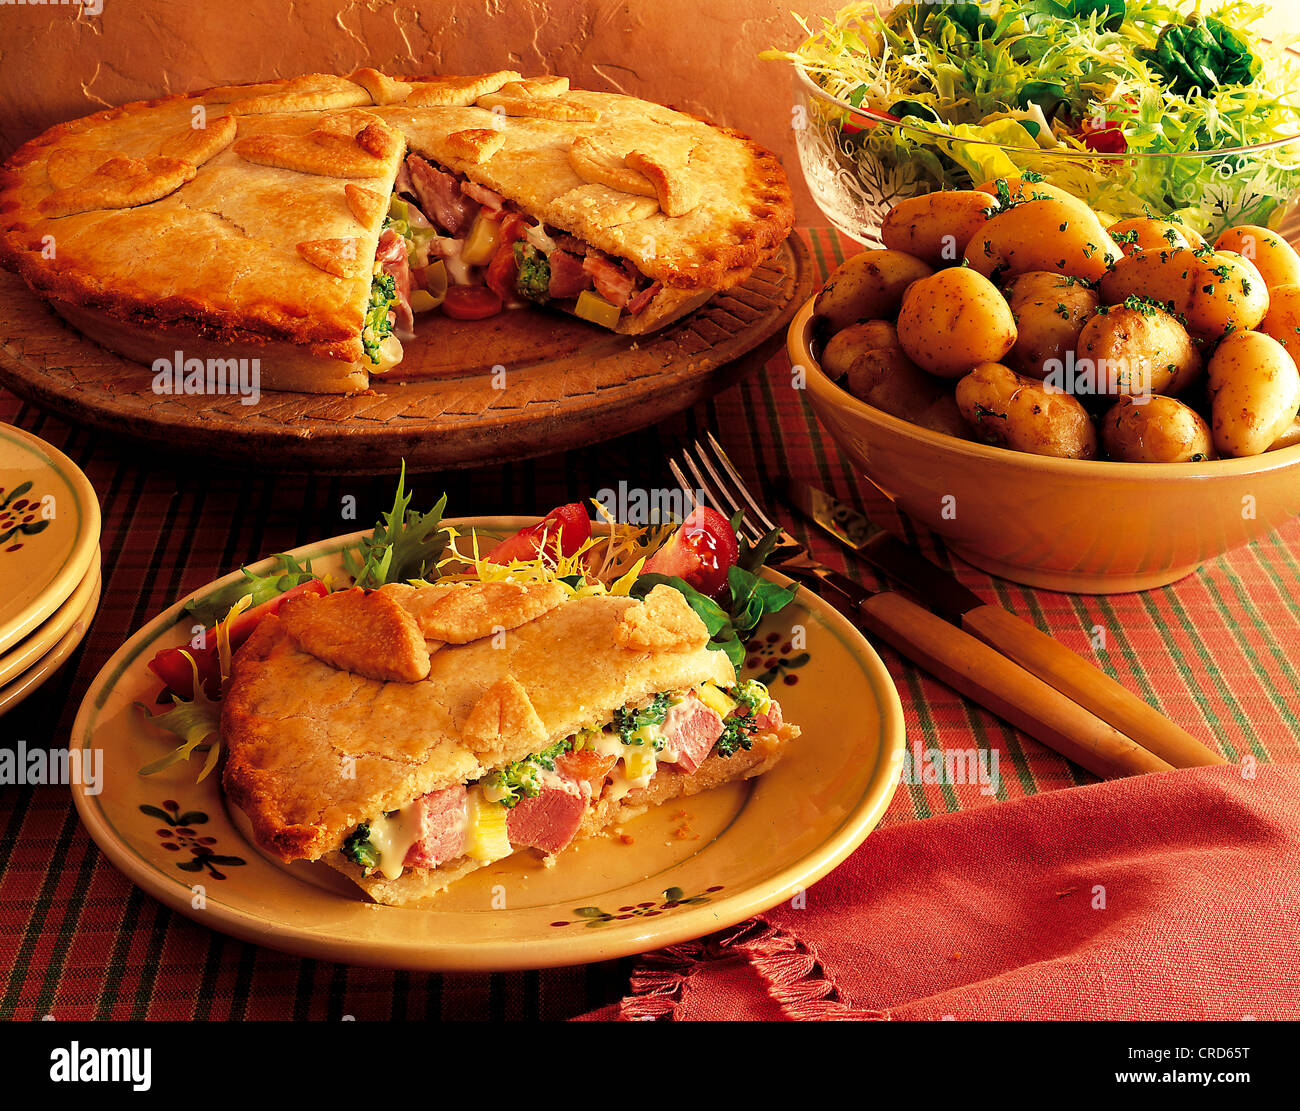 Ham and carrot pie, pastry filled with carrots, broccoli, ham and processed cheese, USA. Stock Photo